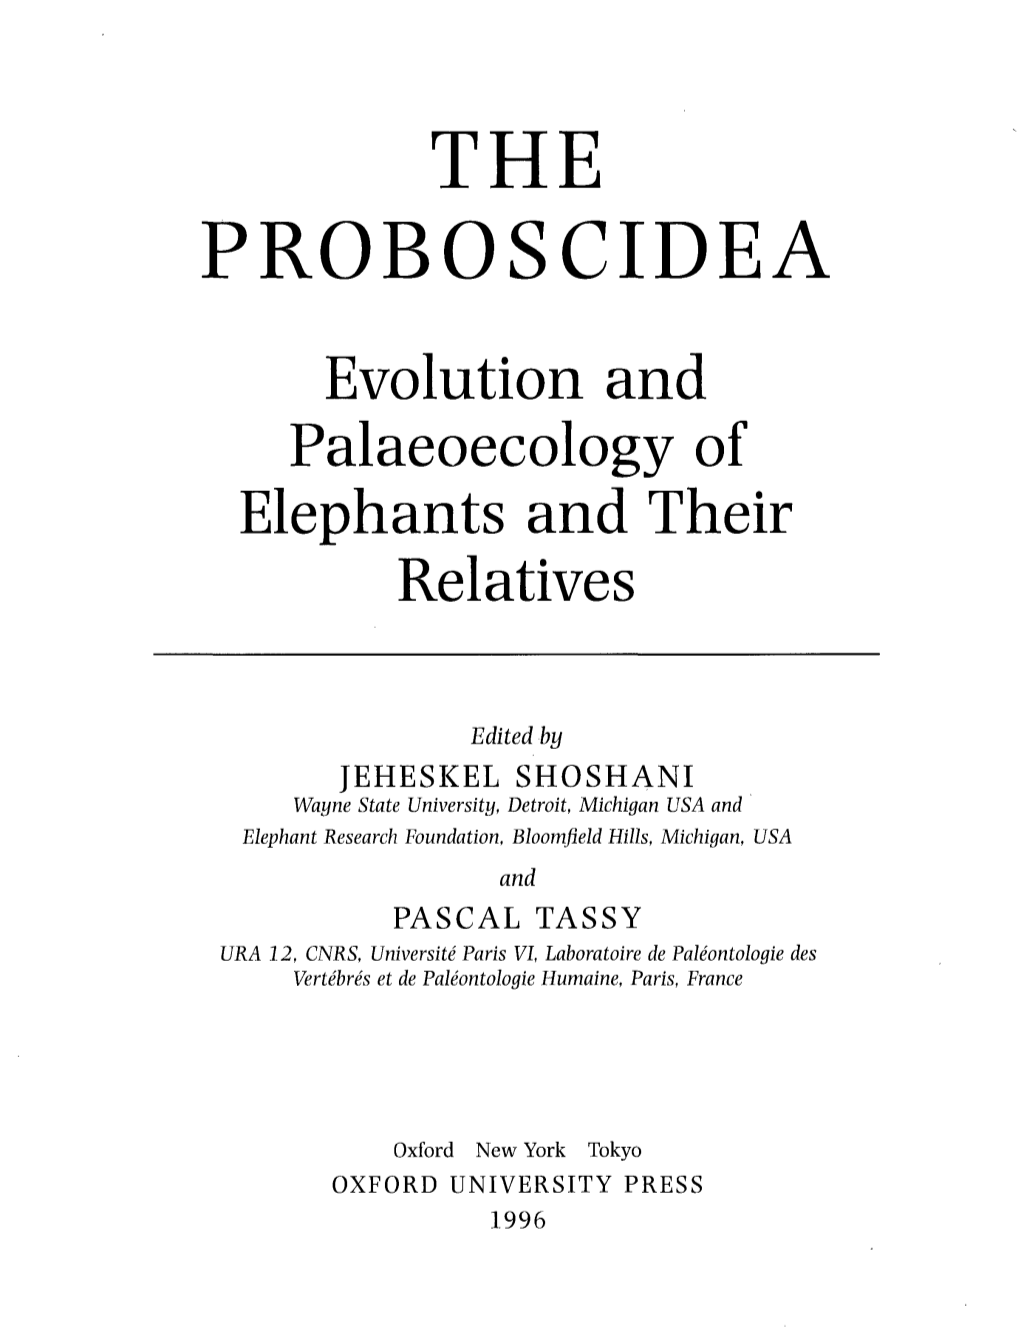 THE PROBOSCIDEA Evolution and Palaeoecology of Elephants and Their Relatives